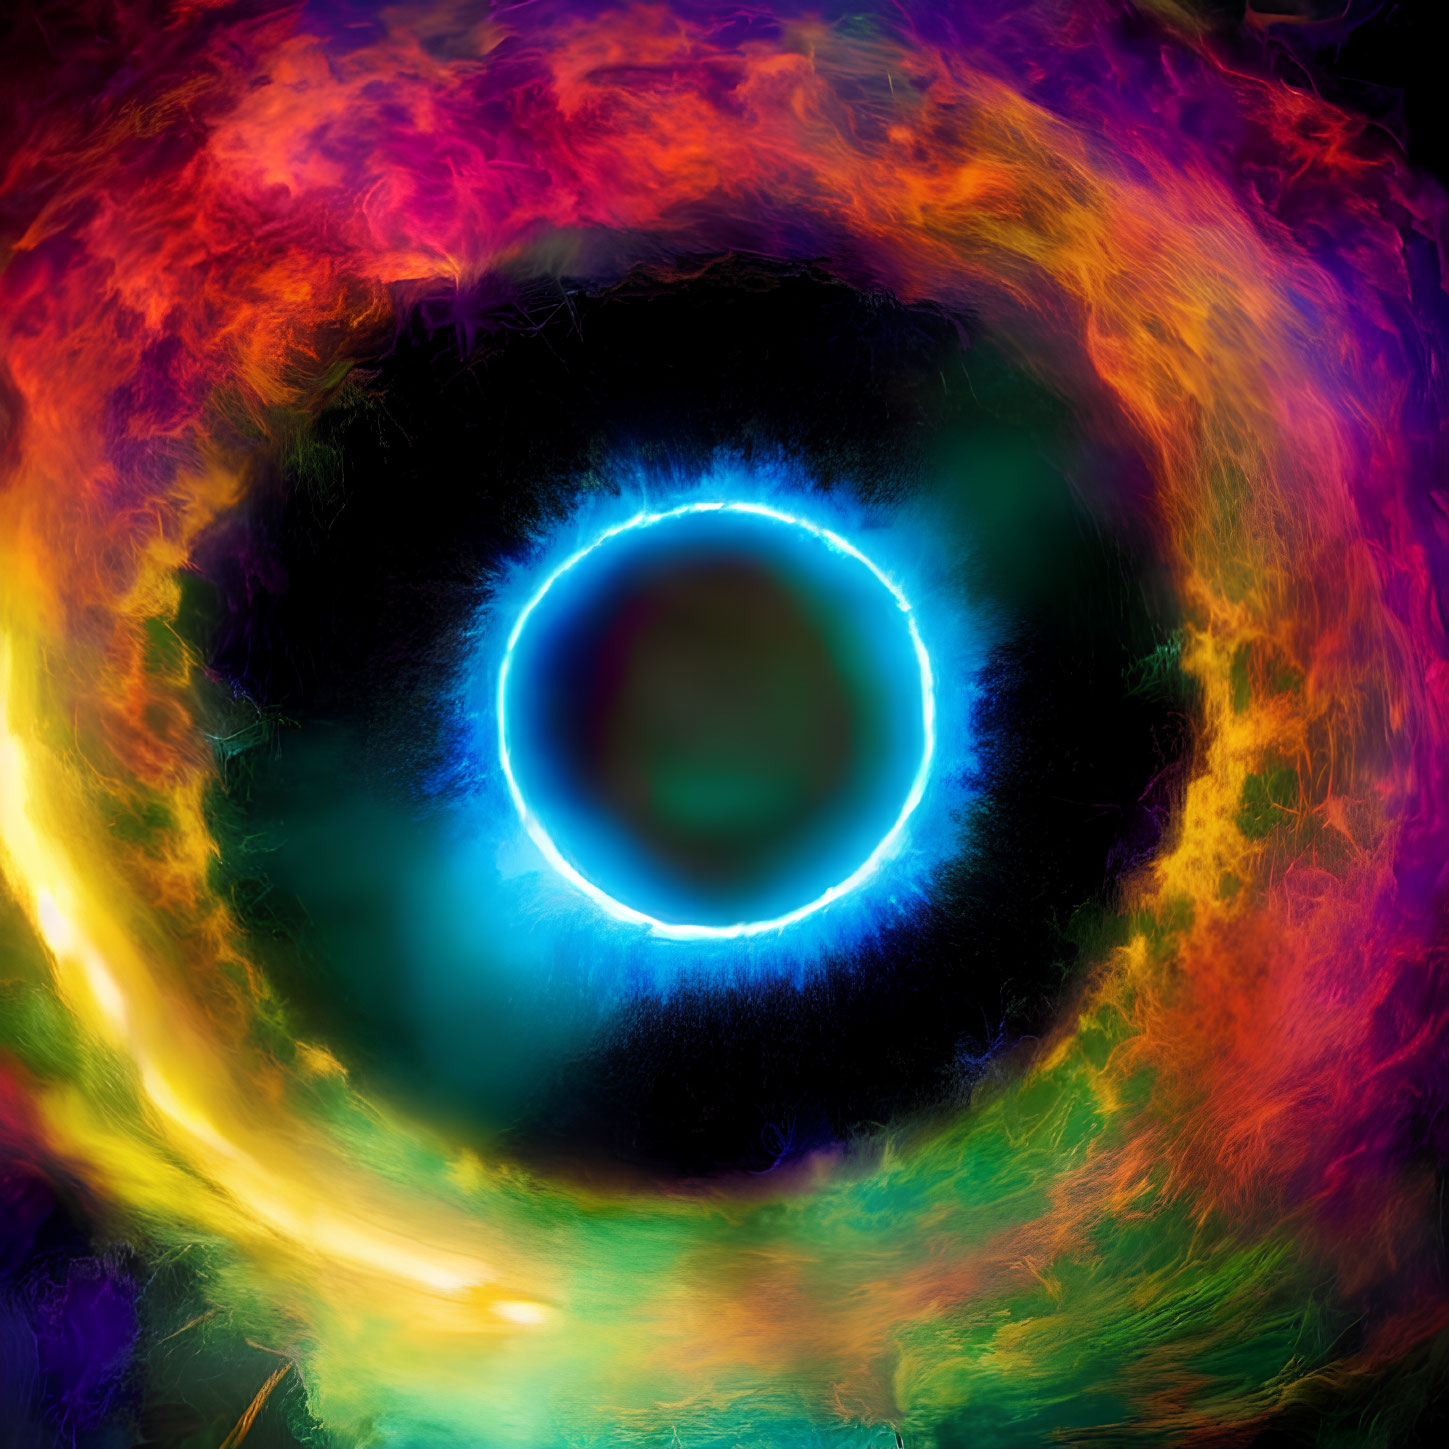 Colorful digital artwork: Eye-like nebula with blue ring and swirling colors